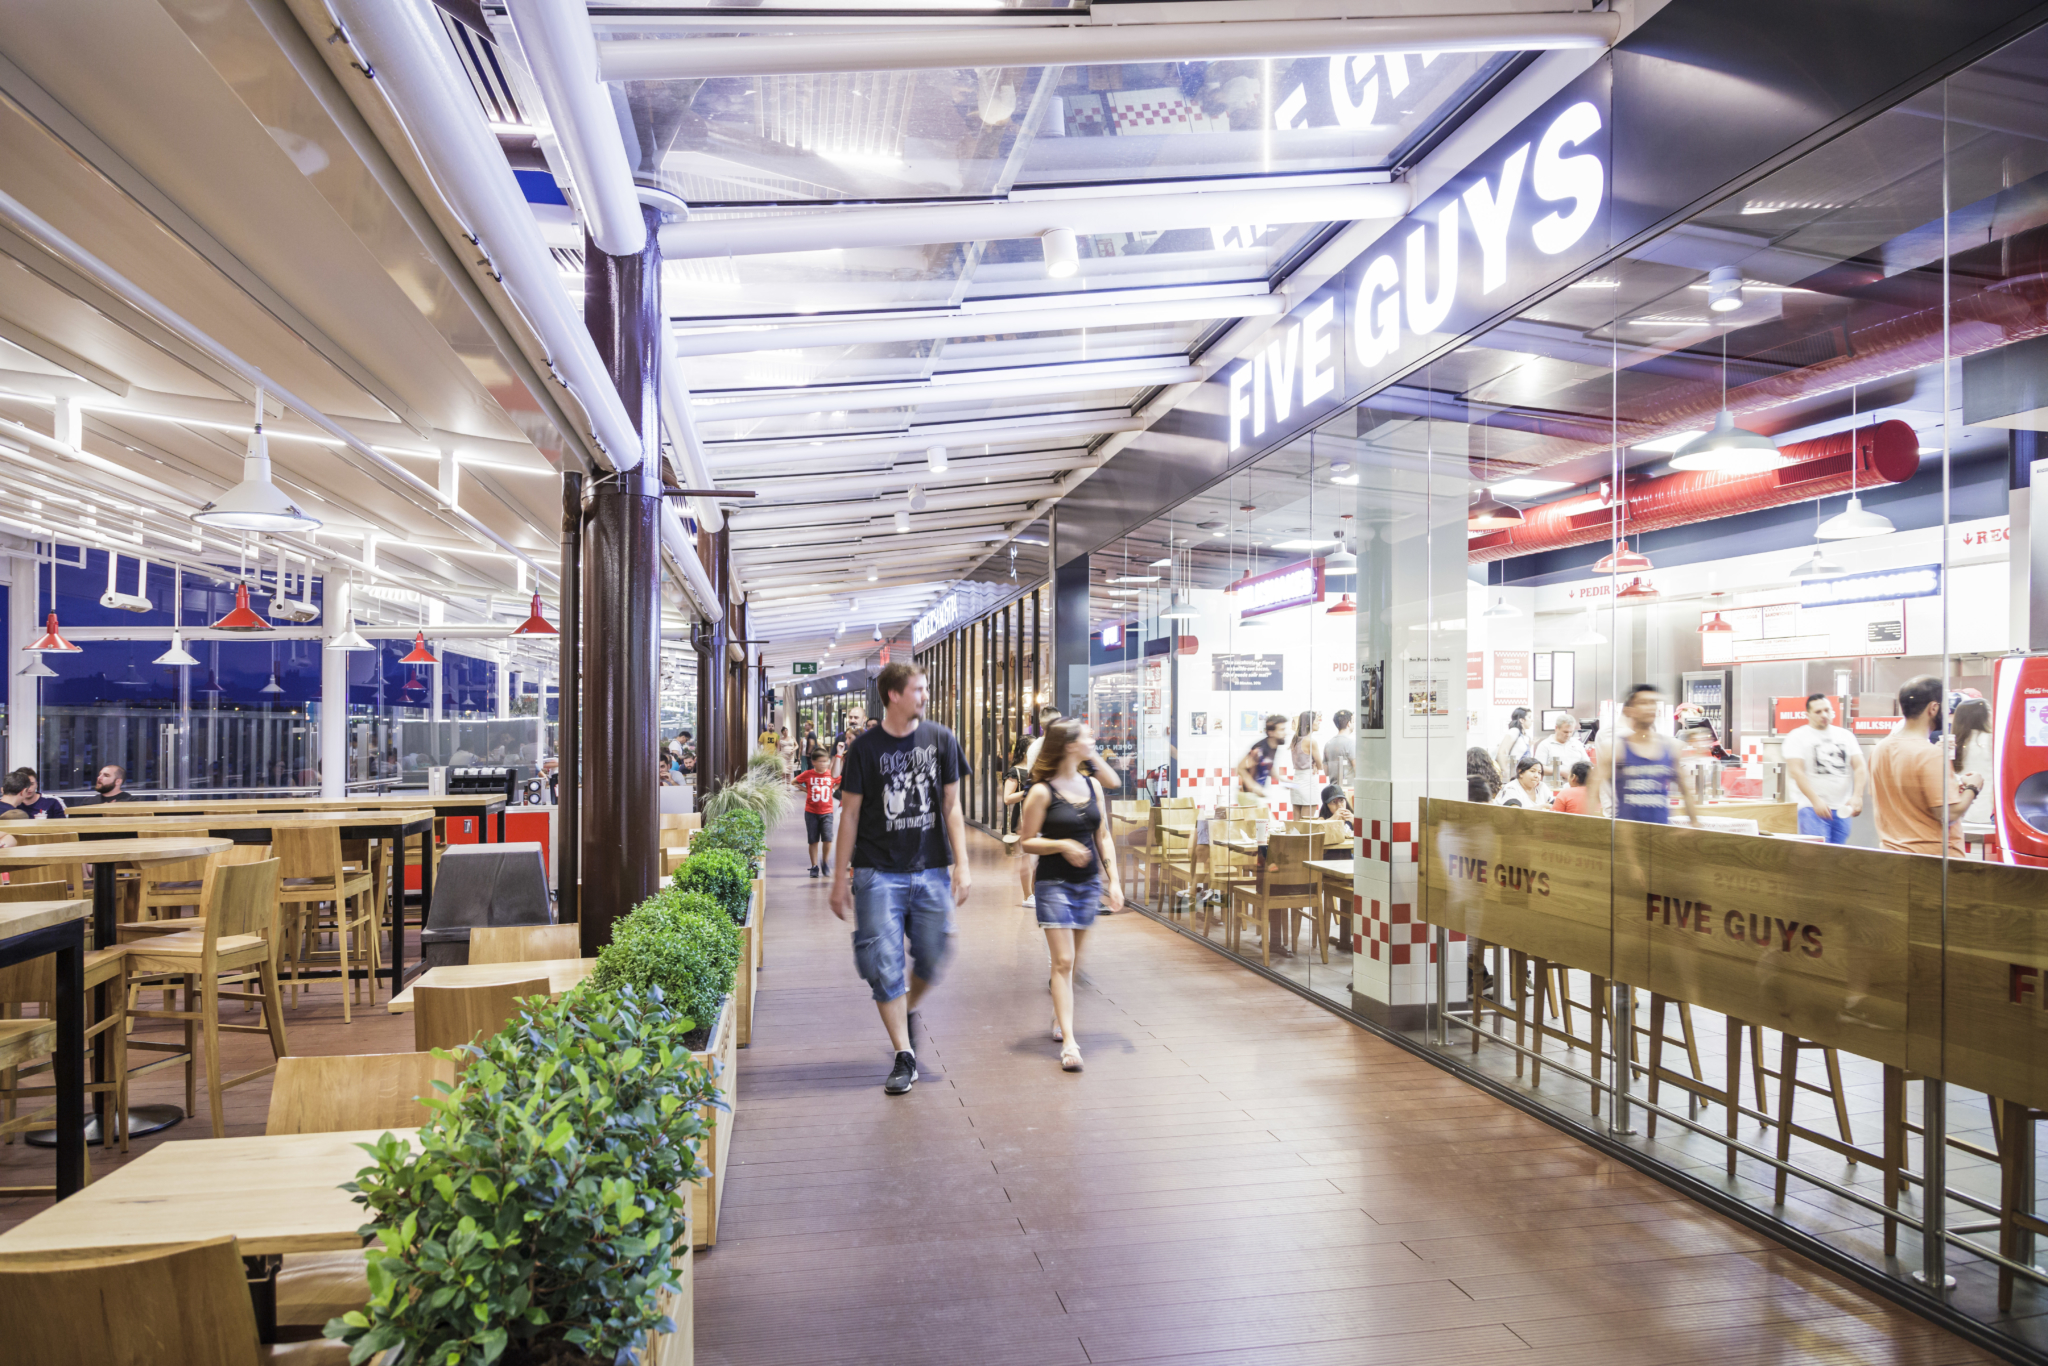 DLF's revamped shopping mall to allot 38% space for F&B